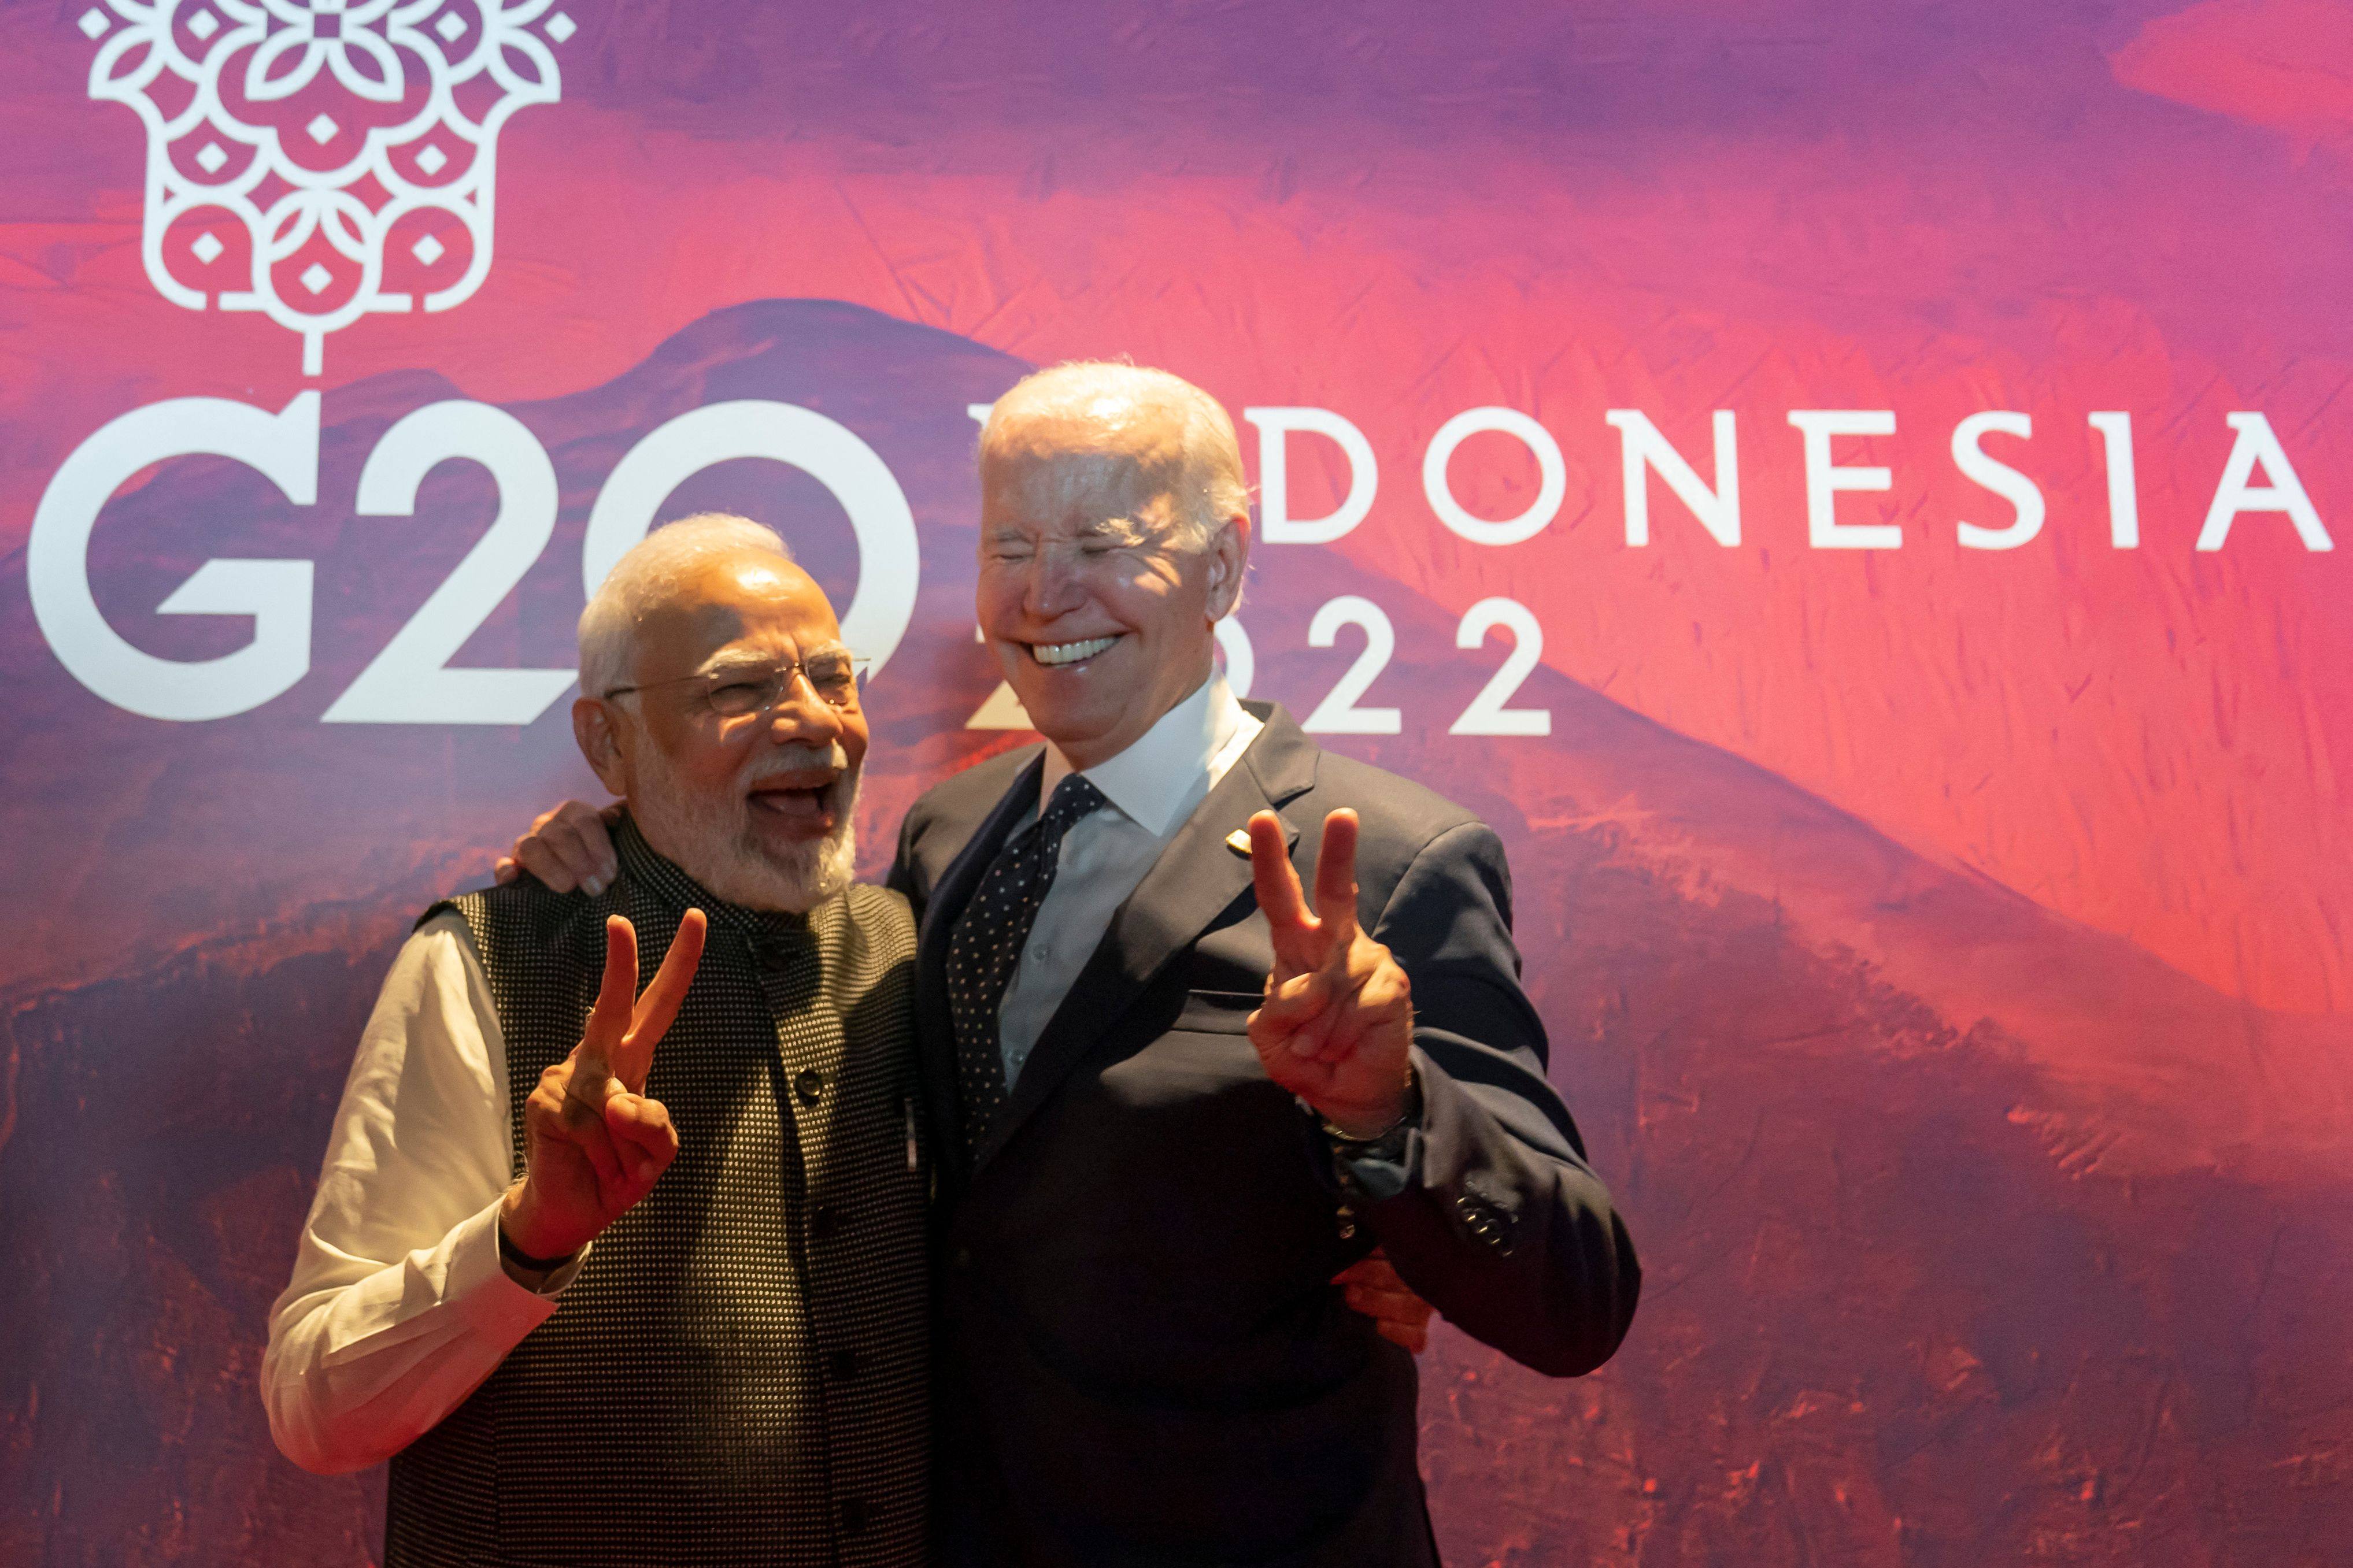 Indian Prime Minister Narendra Modi and US President Joe Biden pose for a photo at the G20 Summit in Nusa Dua, Bali, Indonesia, on November 15, 2022. Photo: Pool via AFP